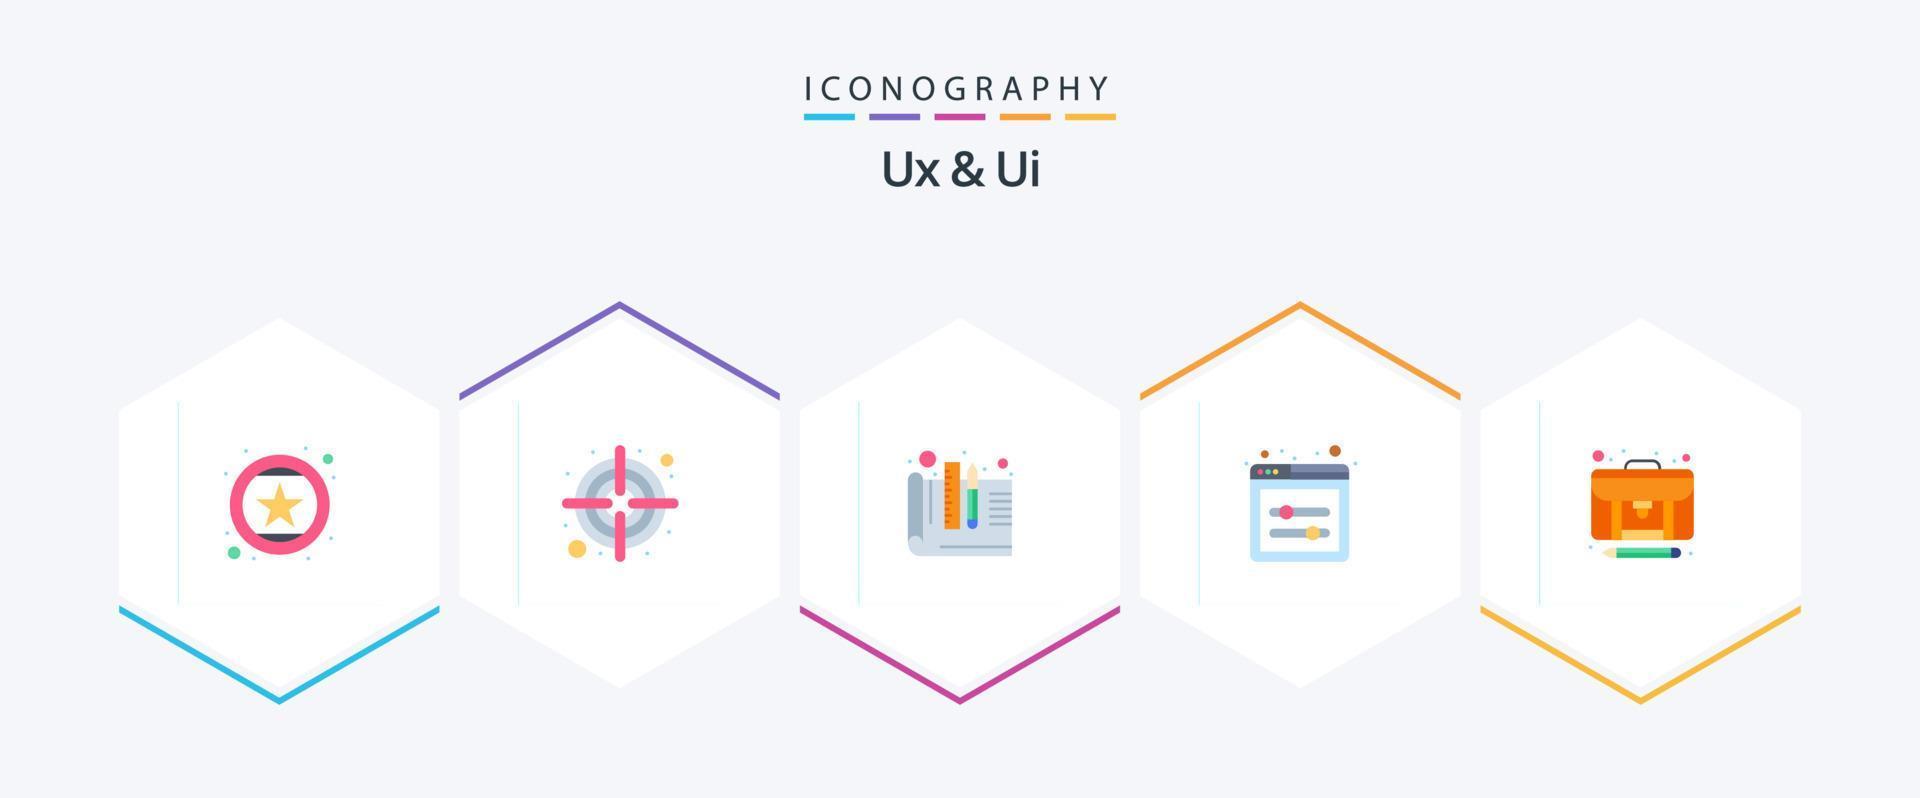 Ux And Ui 25 Flat icon pack including creator. article. creative. user interface design. interface web element vector